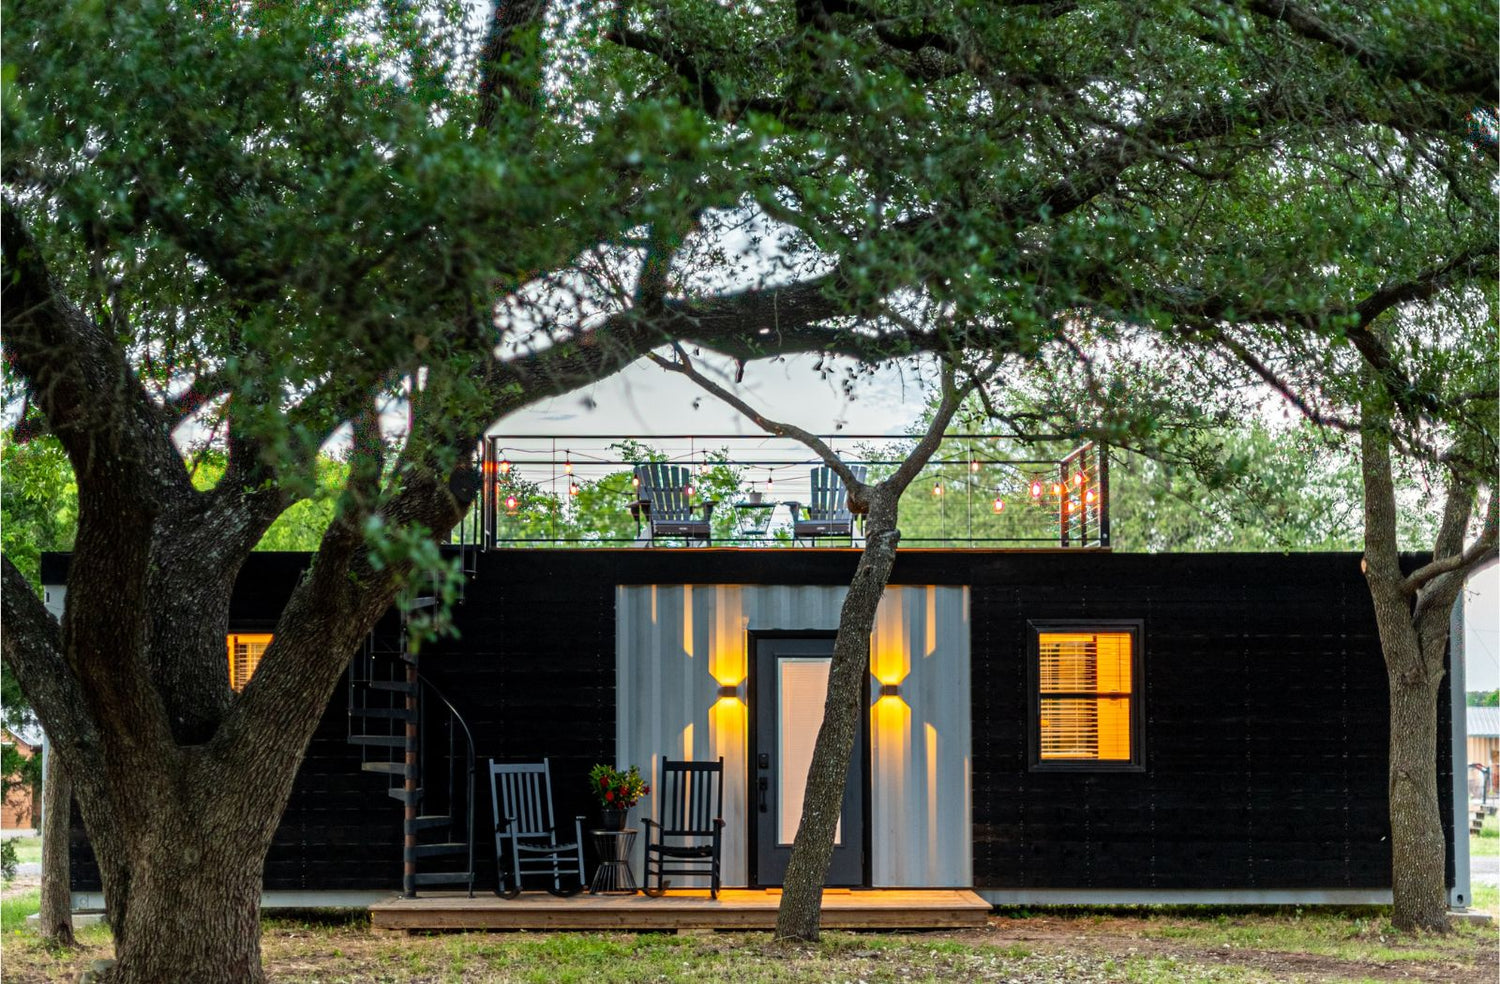 Small tiny home with lights on and tress around it